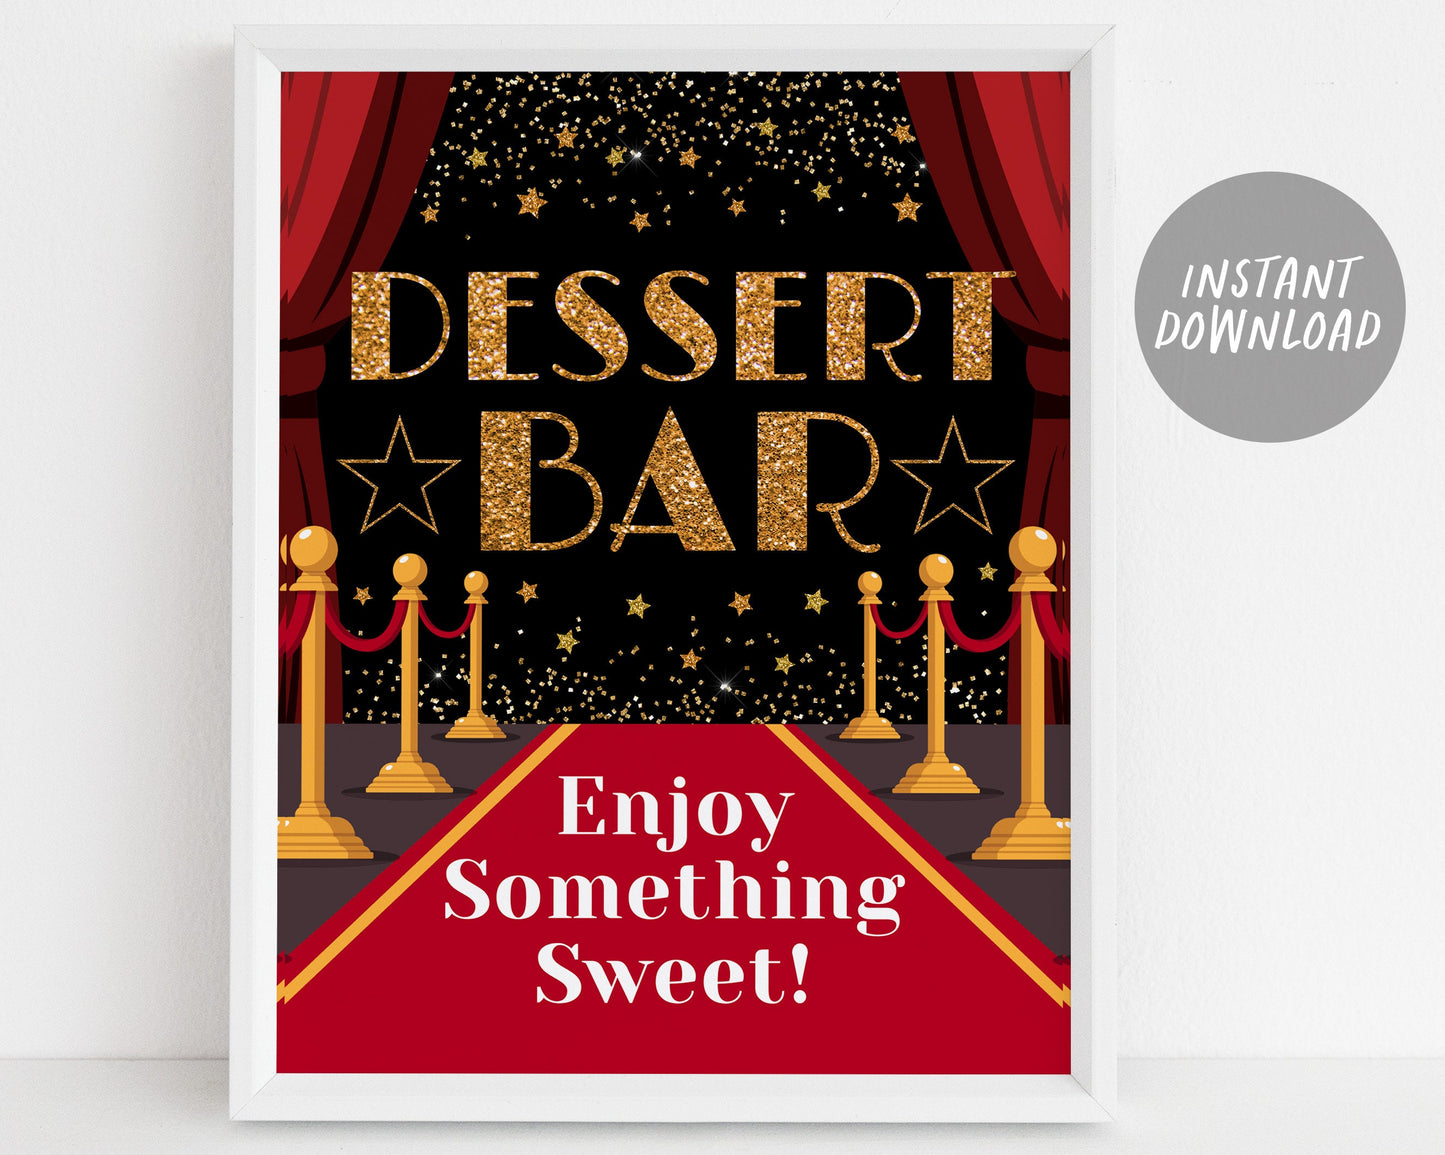 Red Carpet Birthday Baby Shower Prom Signs BUNDLE, Hollywood Theme VIP Access Food Dessert Bar Drinks Photo Booth Thank You Poster Printable